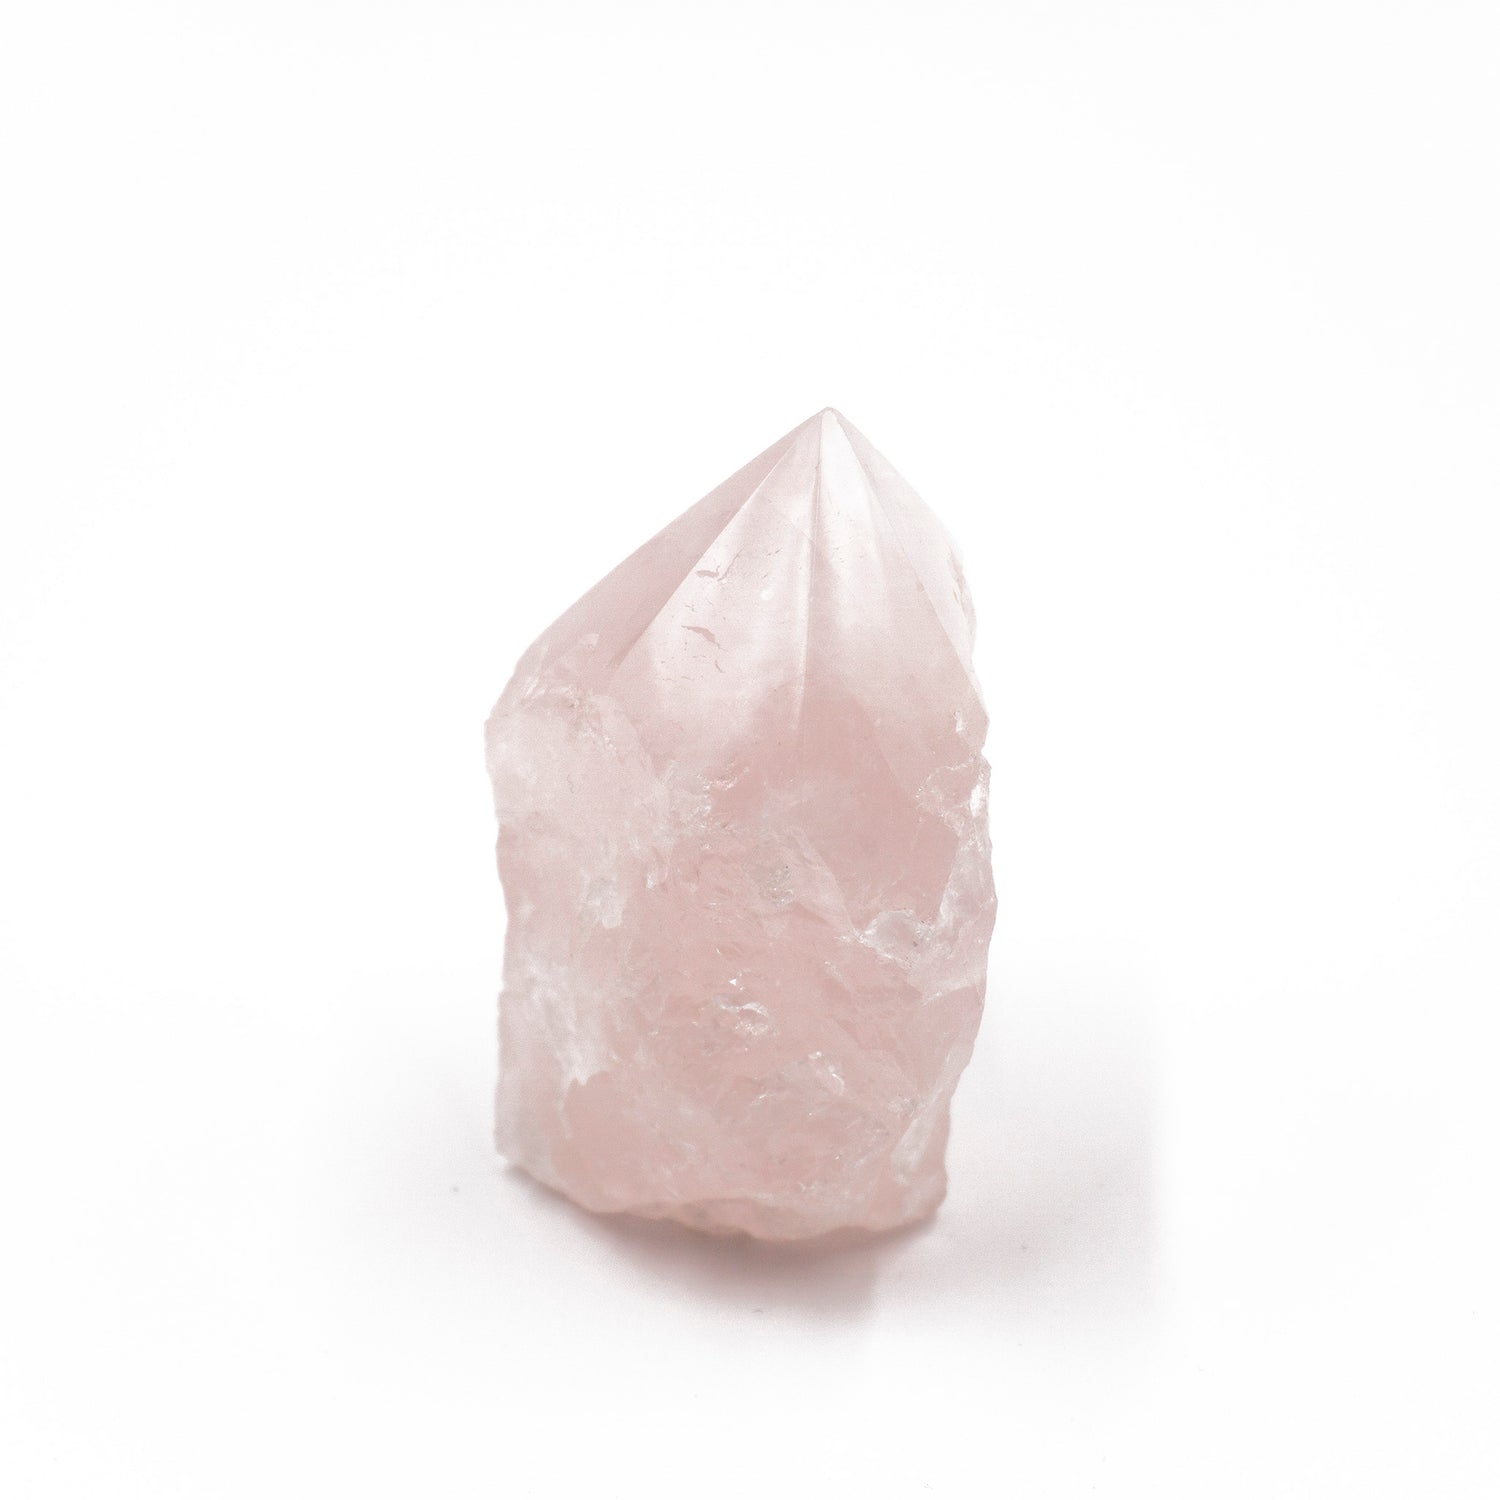 rough cut piece of pink crystal, its top faceted into a point